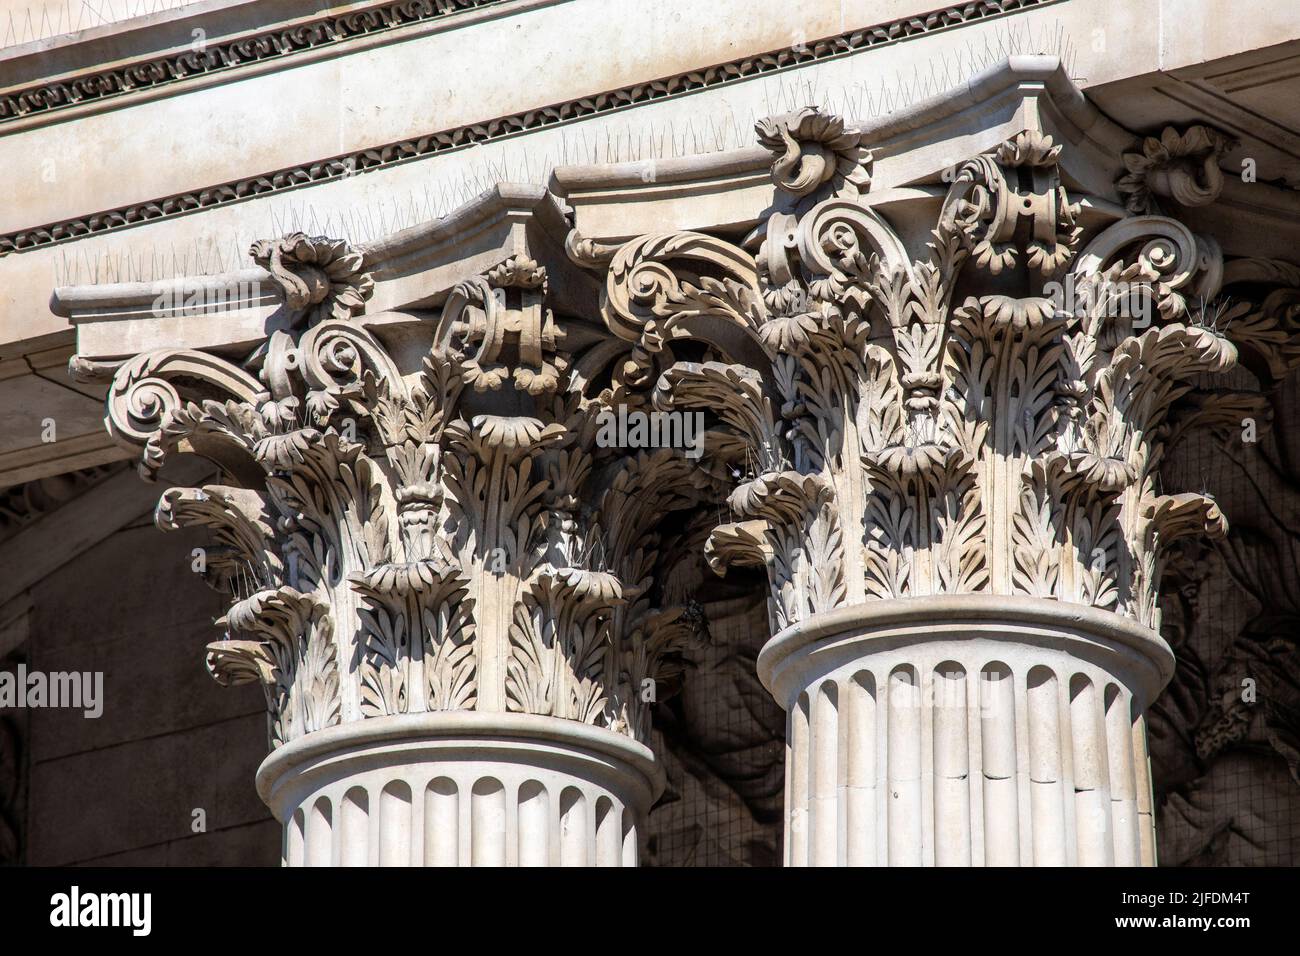 Close-up shot of the intricate detail of the exterior columns of St. Pauls Cathedral in the city of London, UK. Stock Photo